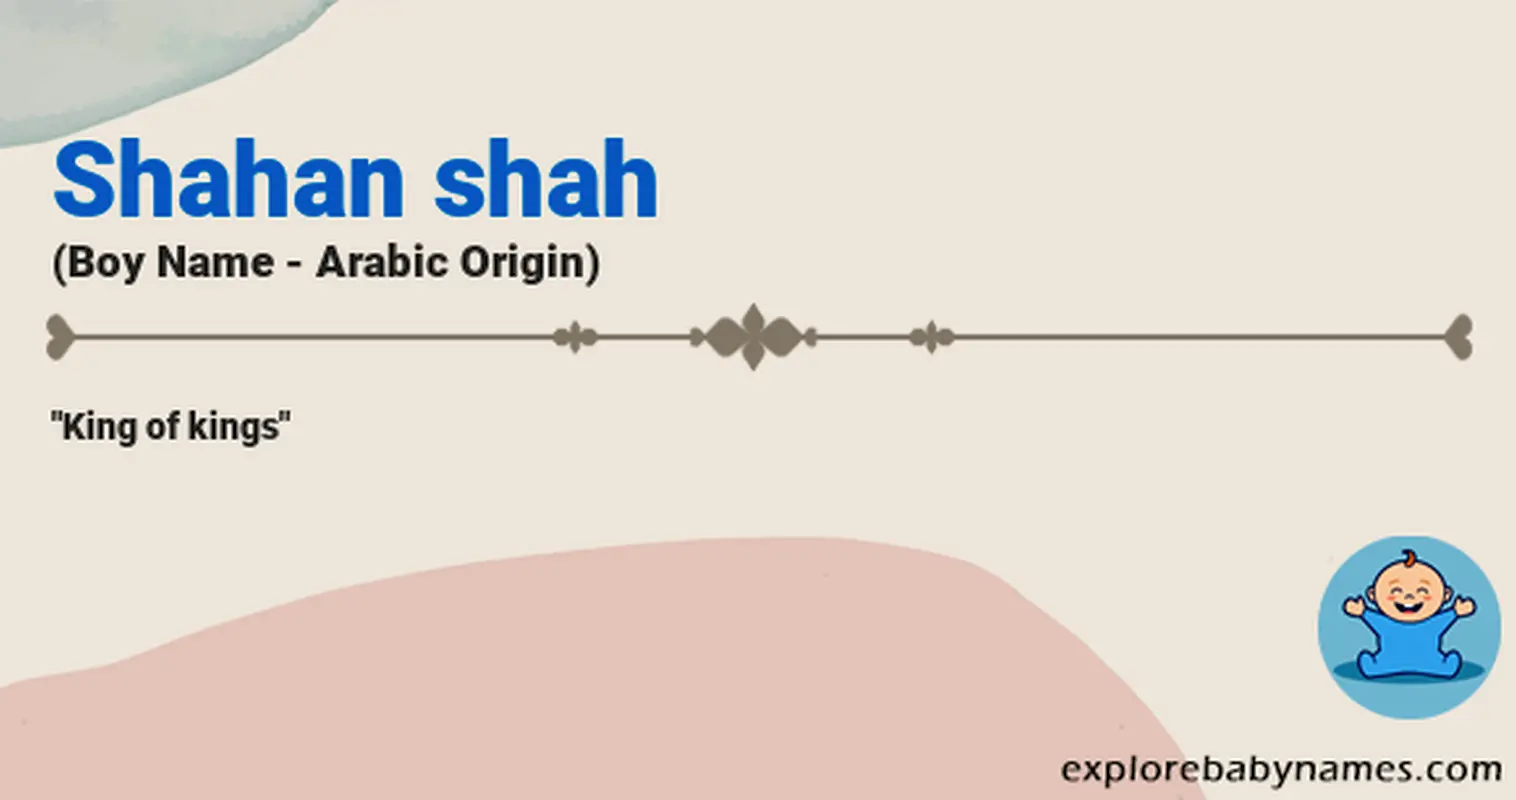 Meaning of Shahan shah